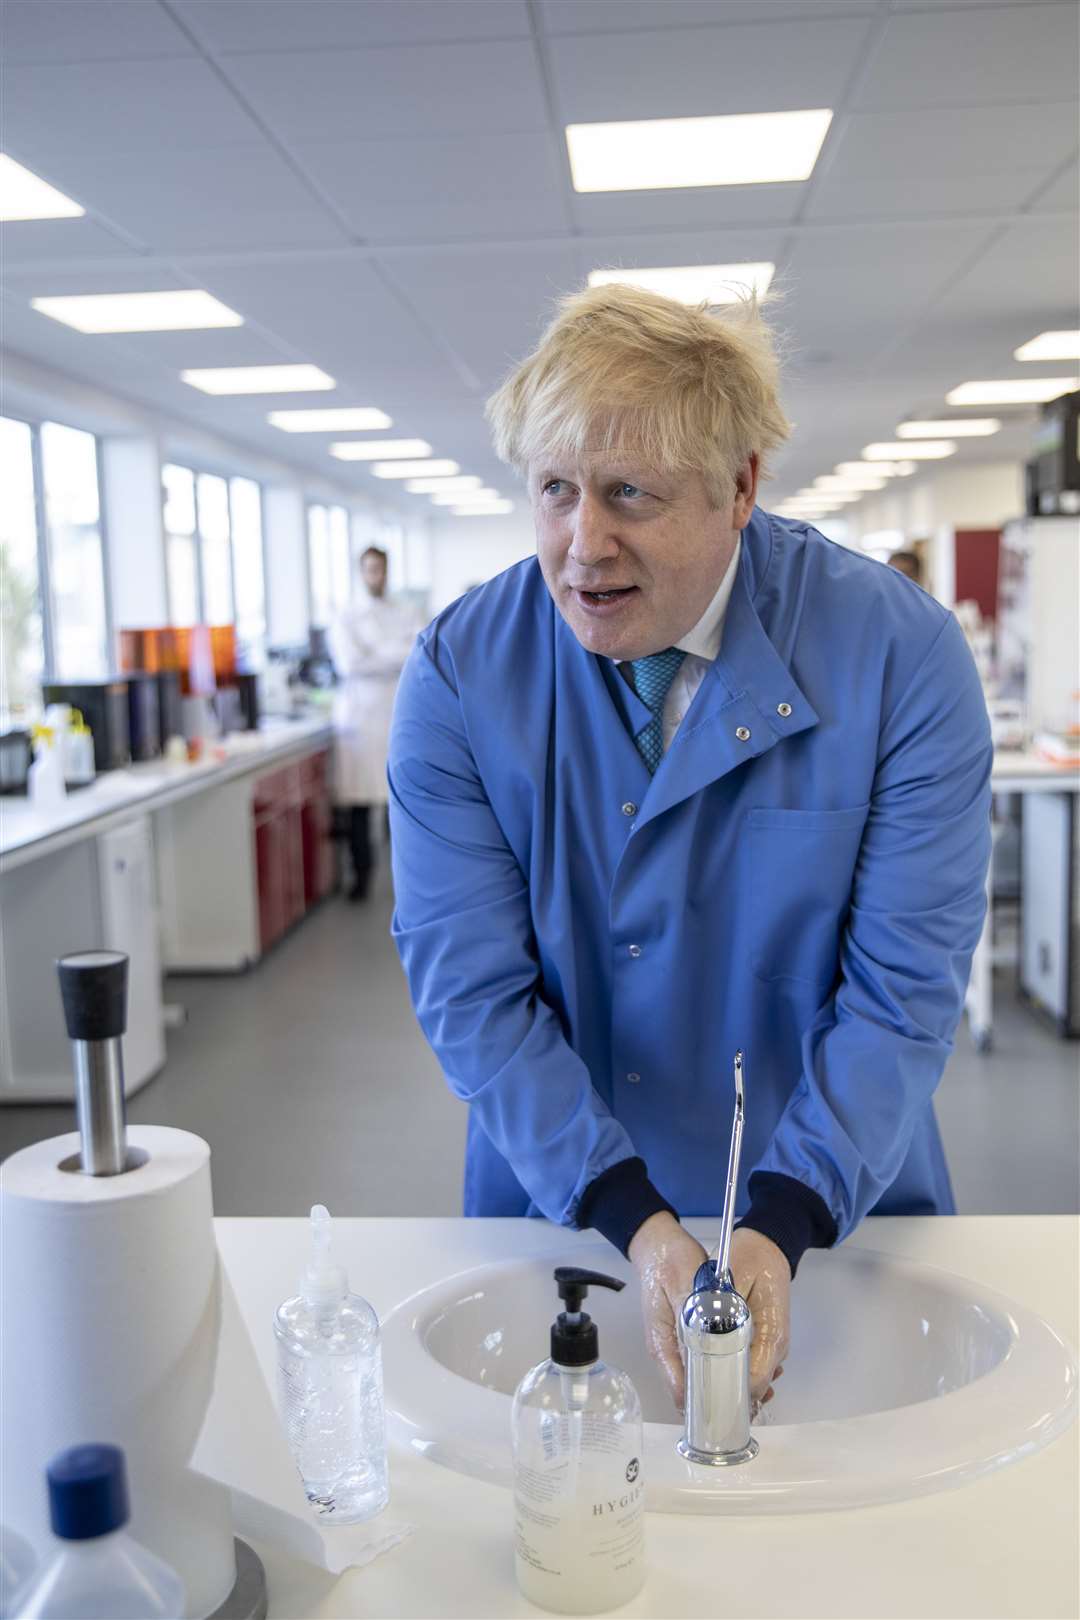 Prime Minister Boris Johnson during a visit to the Mologic Laboratory in Bedfordshire (Jack Hill/The Times/PA)